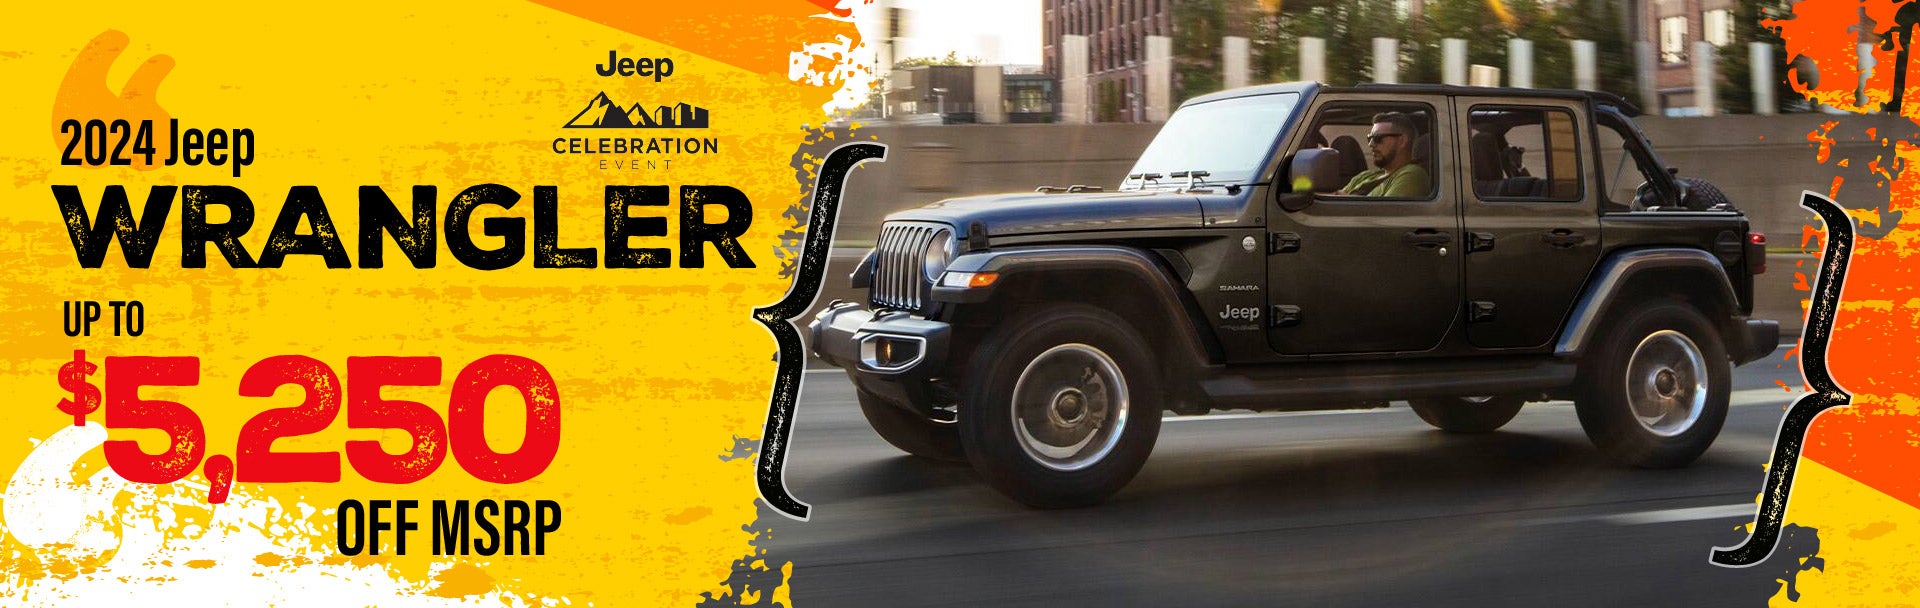 2024 Jeep Wrangler - SAVE up to $5250 off MSRP